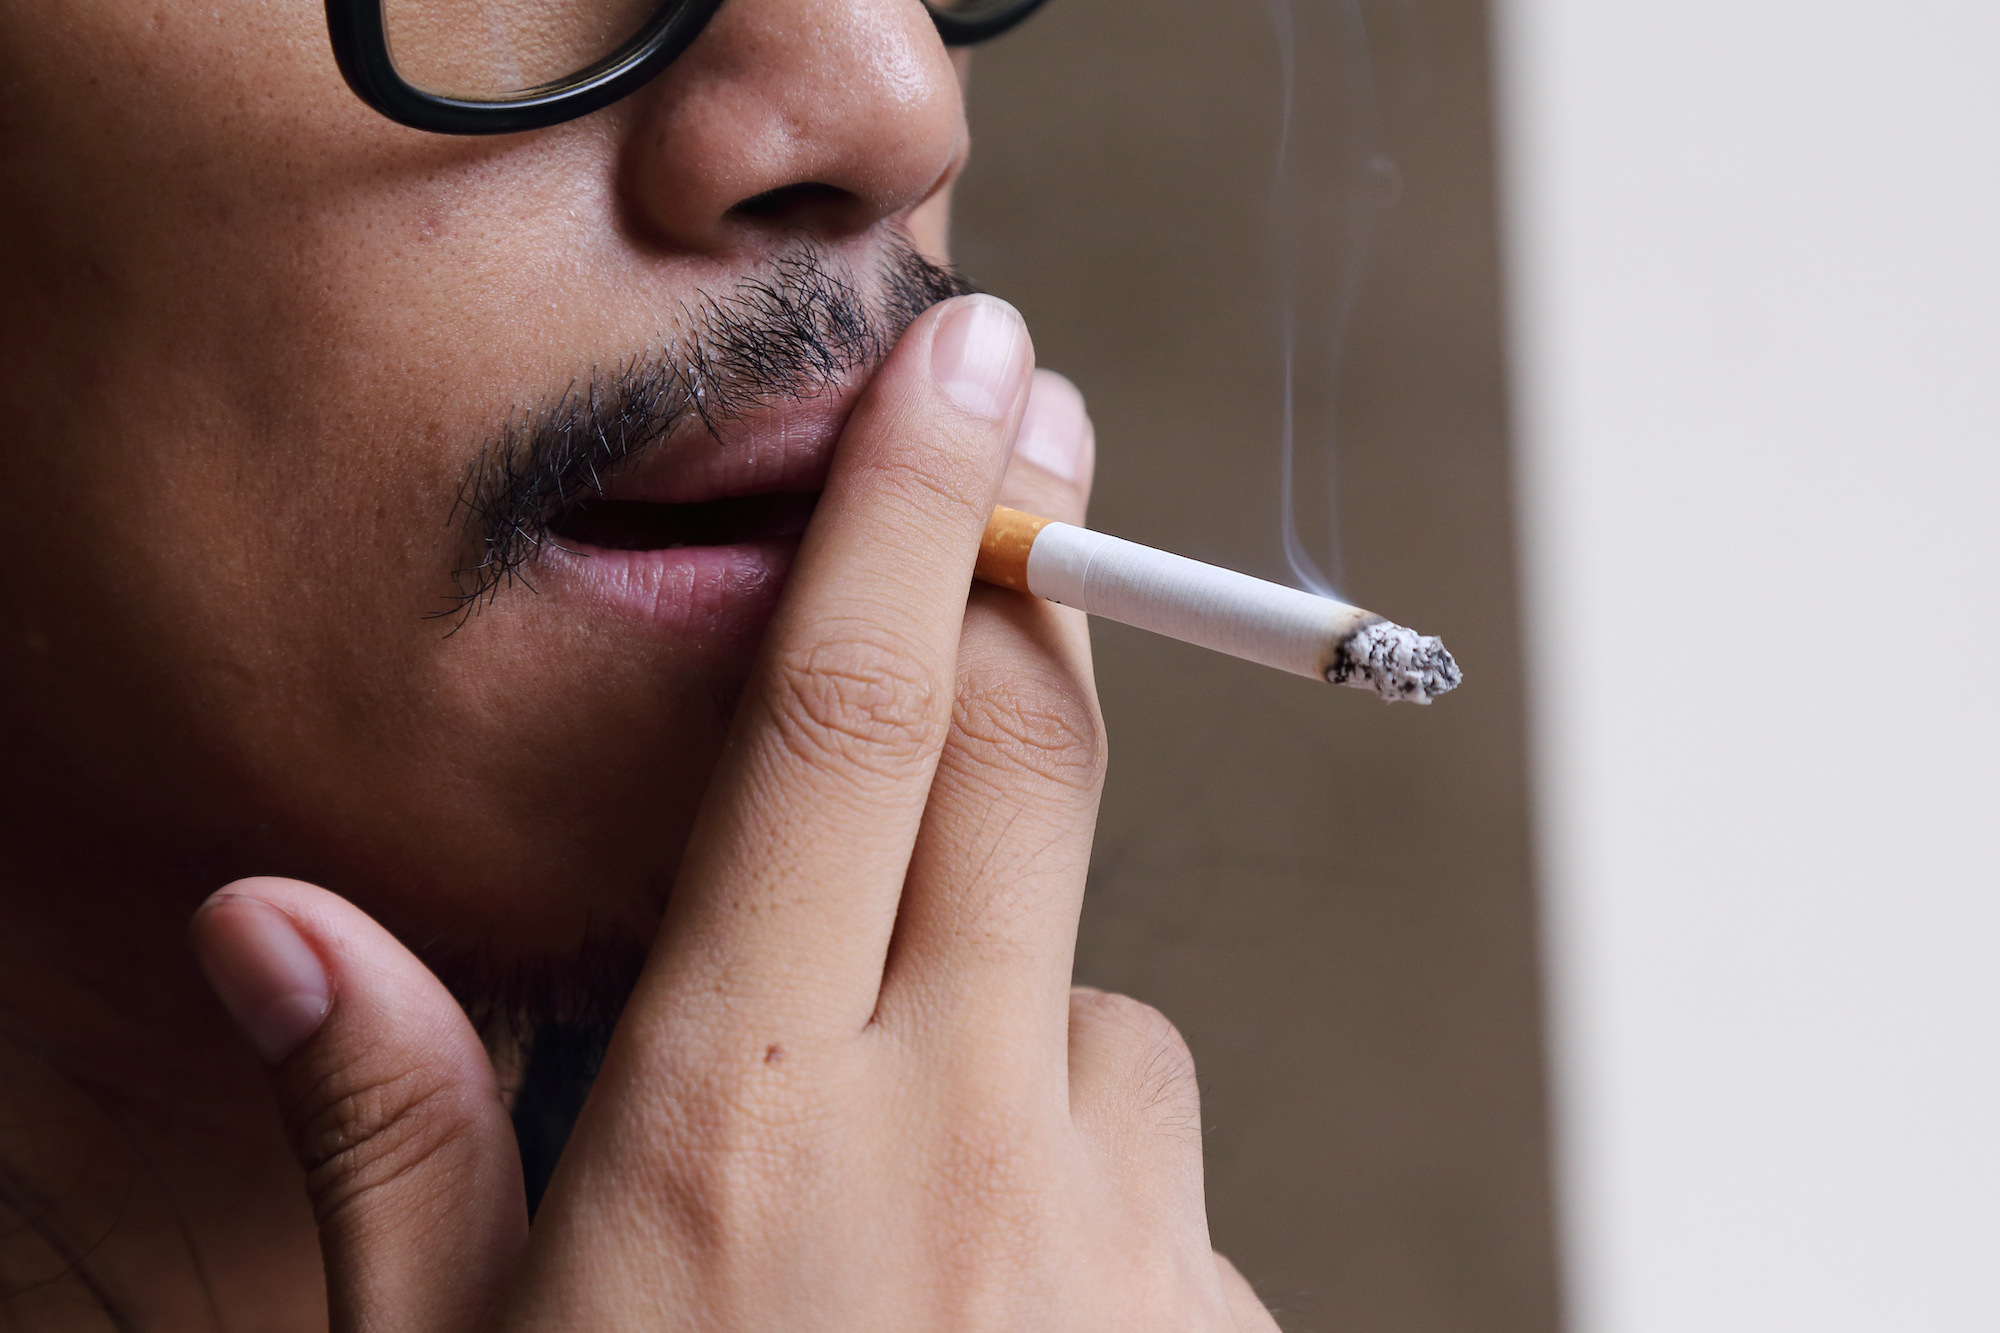 Smoking prevalence in Macao has fallen to just over 10 percent